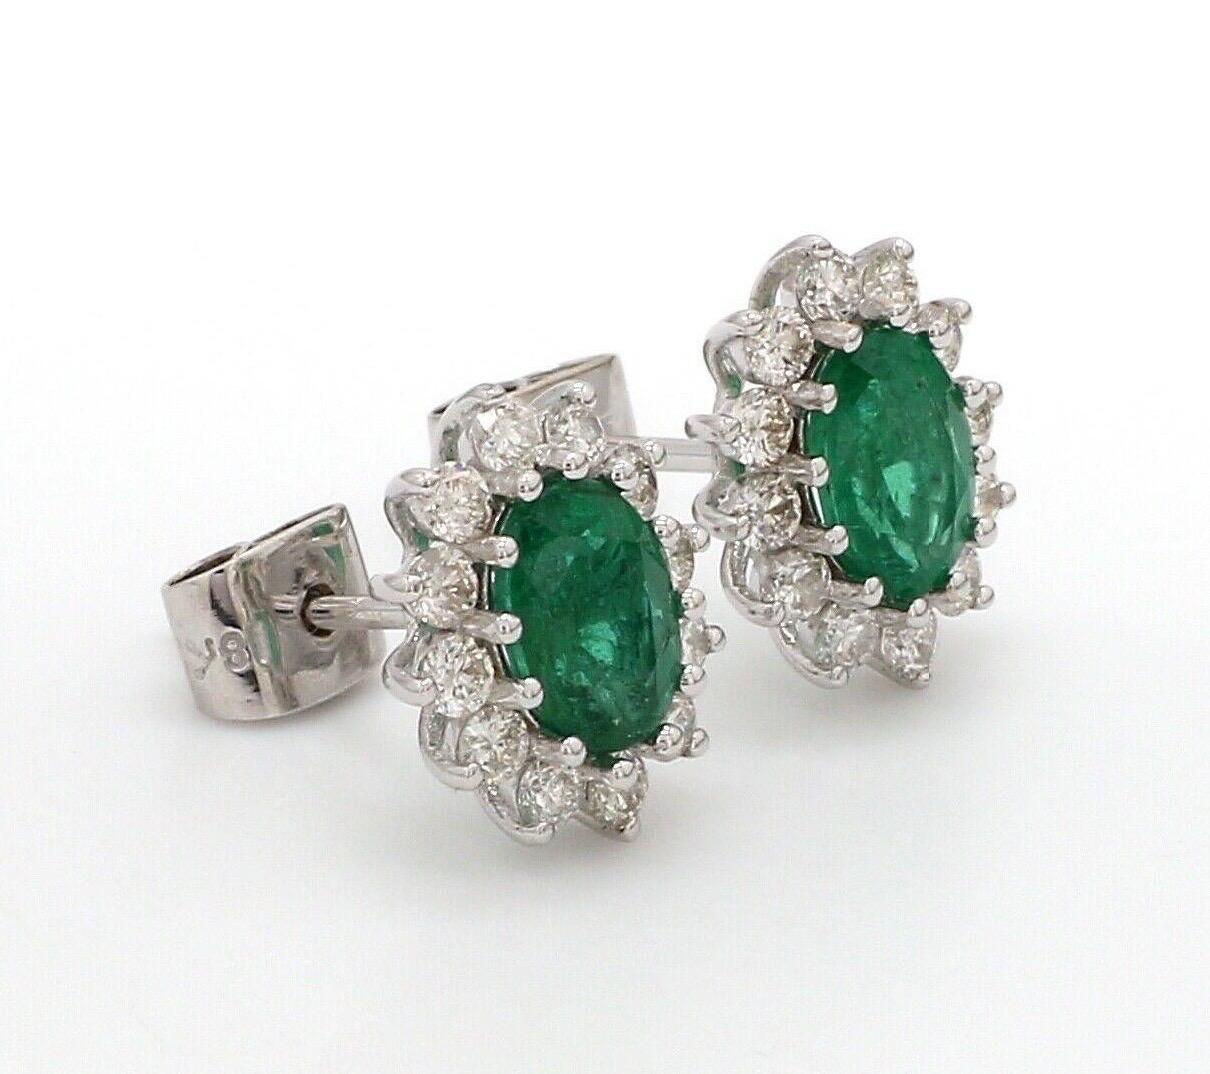 Cast in 18 karat gold, these stud earrings are hand set with 1.48 carats emerald and .75 carats of glimmering diamonds. Available in white, rose and yellow gold.

FOLLOW MEGHNA JEWELS storefront to view the latest collection & exclusive pieces.